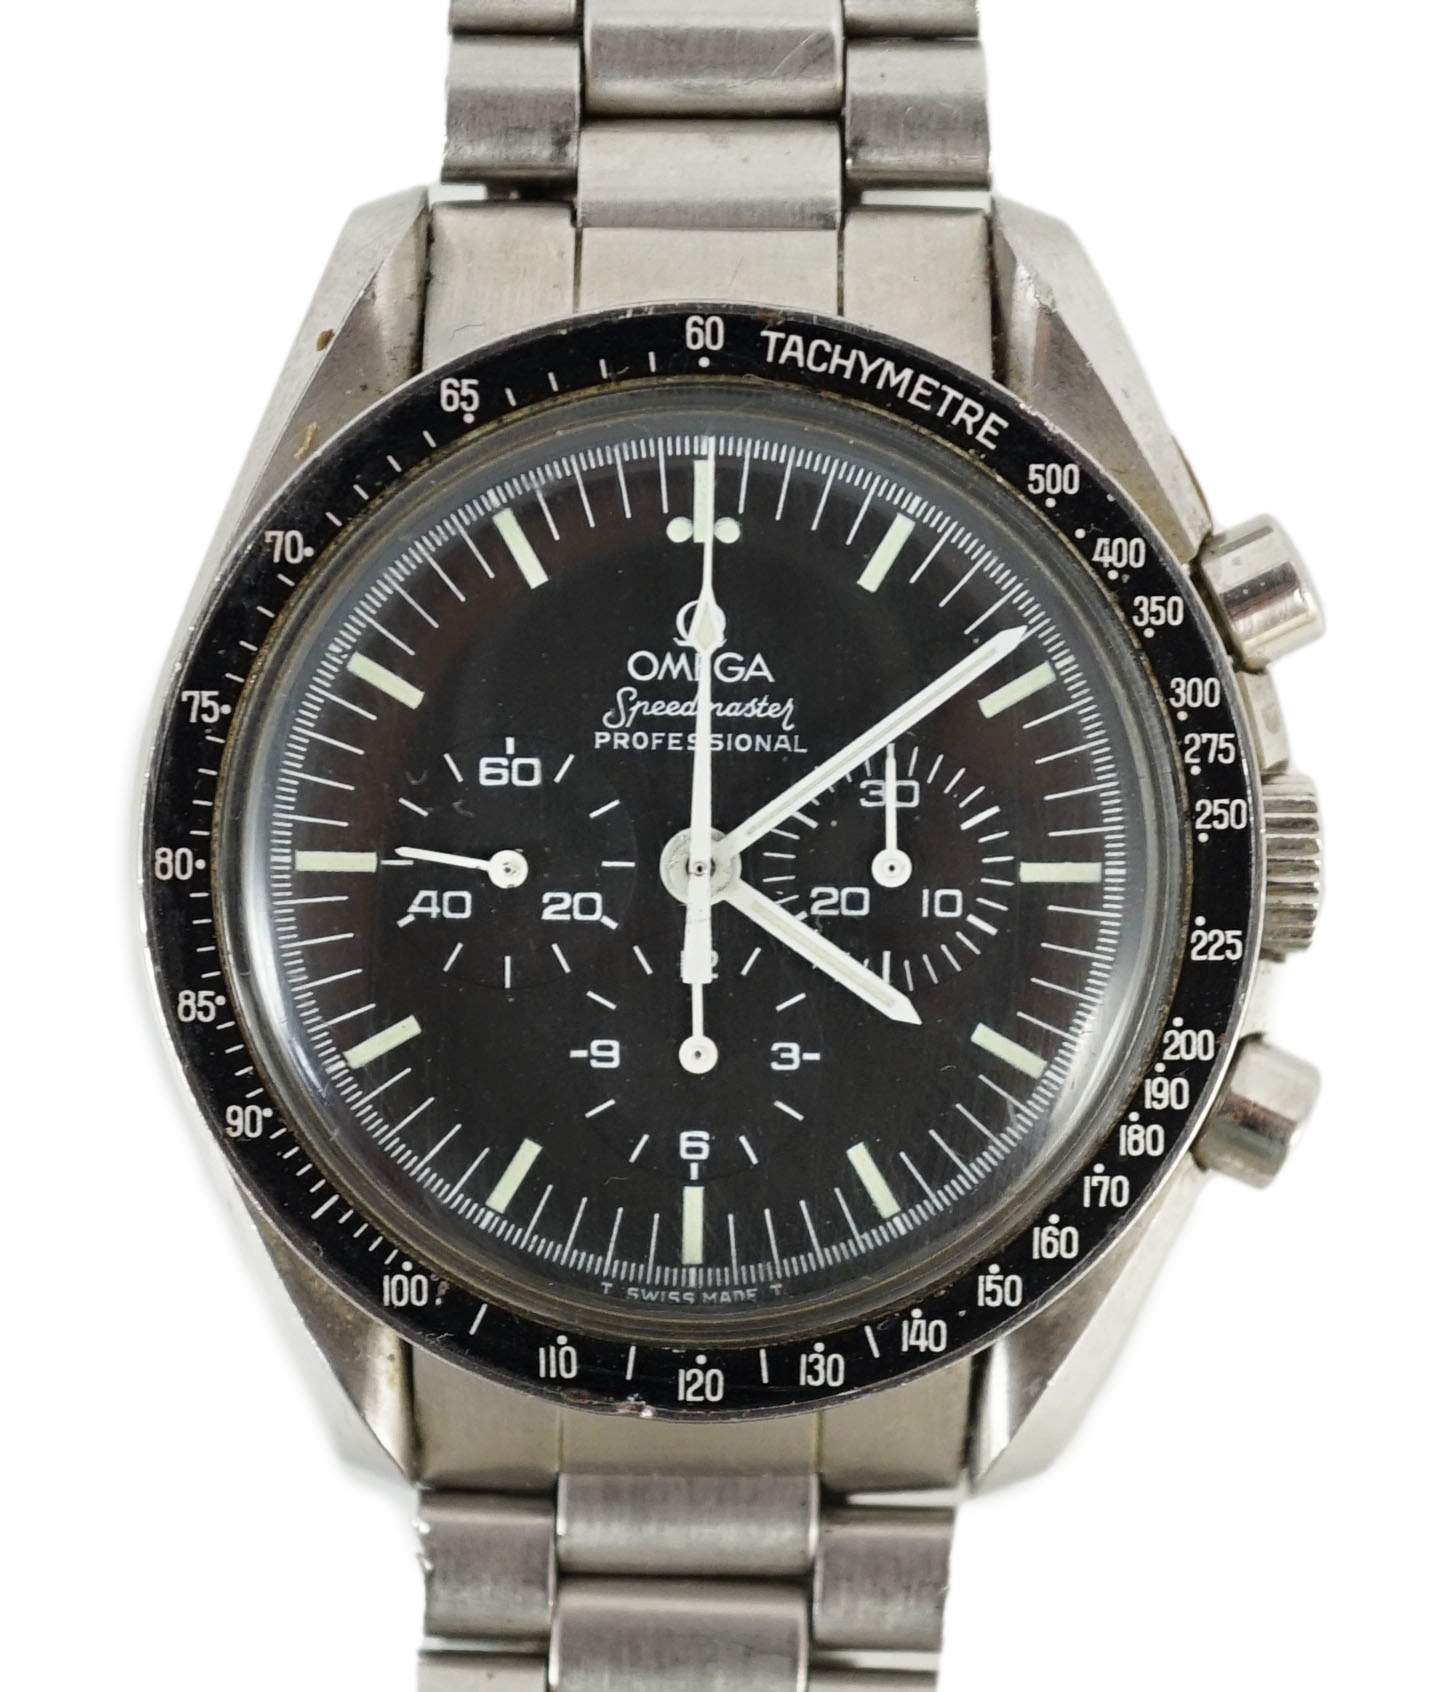 A gentleman's early 1980's stainless steel Omega Speedmaster Professional 'The First Watch Worn On The Moon' manual wind wrist watch, on stainless steel Omega bracelet